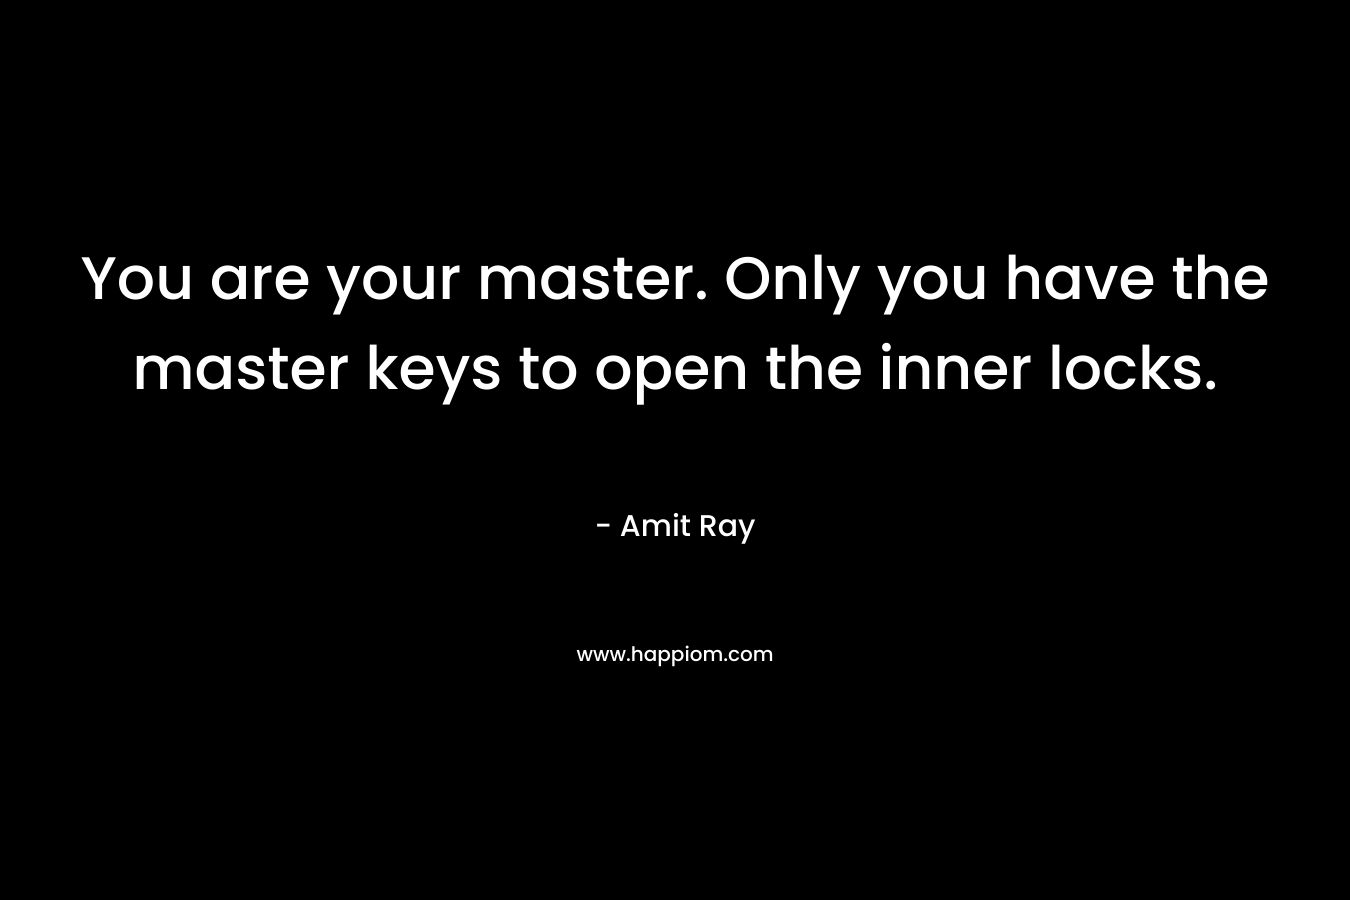 You are your master. Only you have the master keys to open the inner locks.